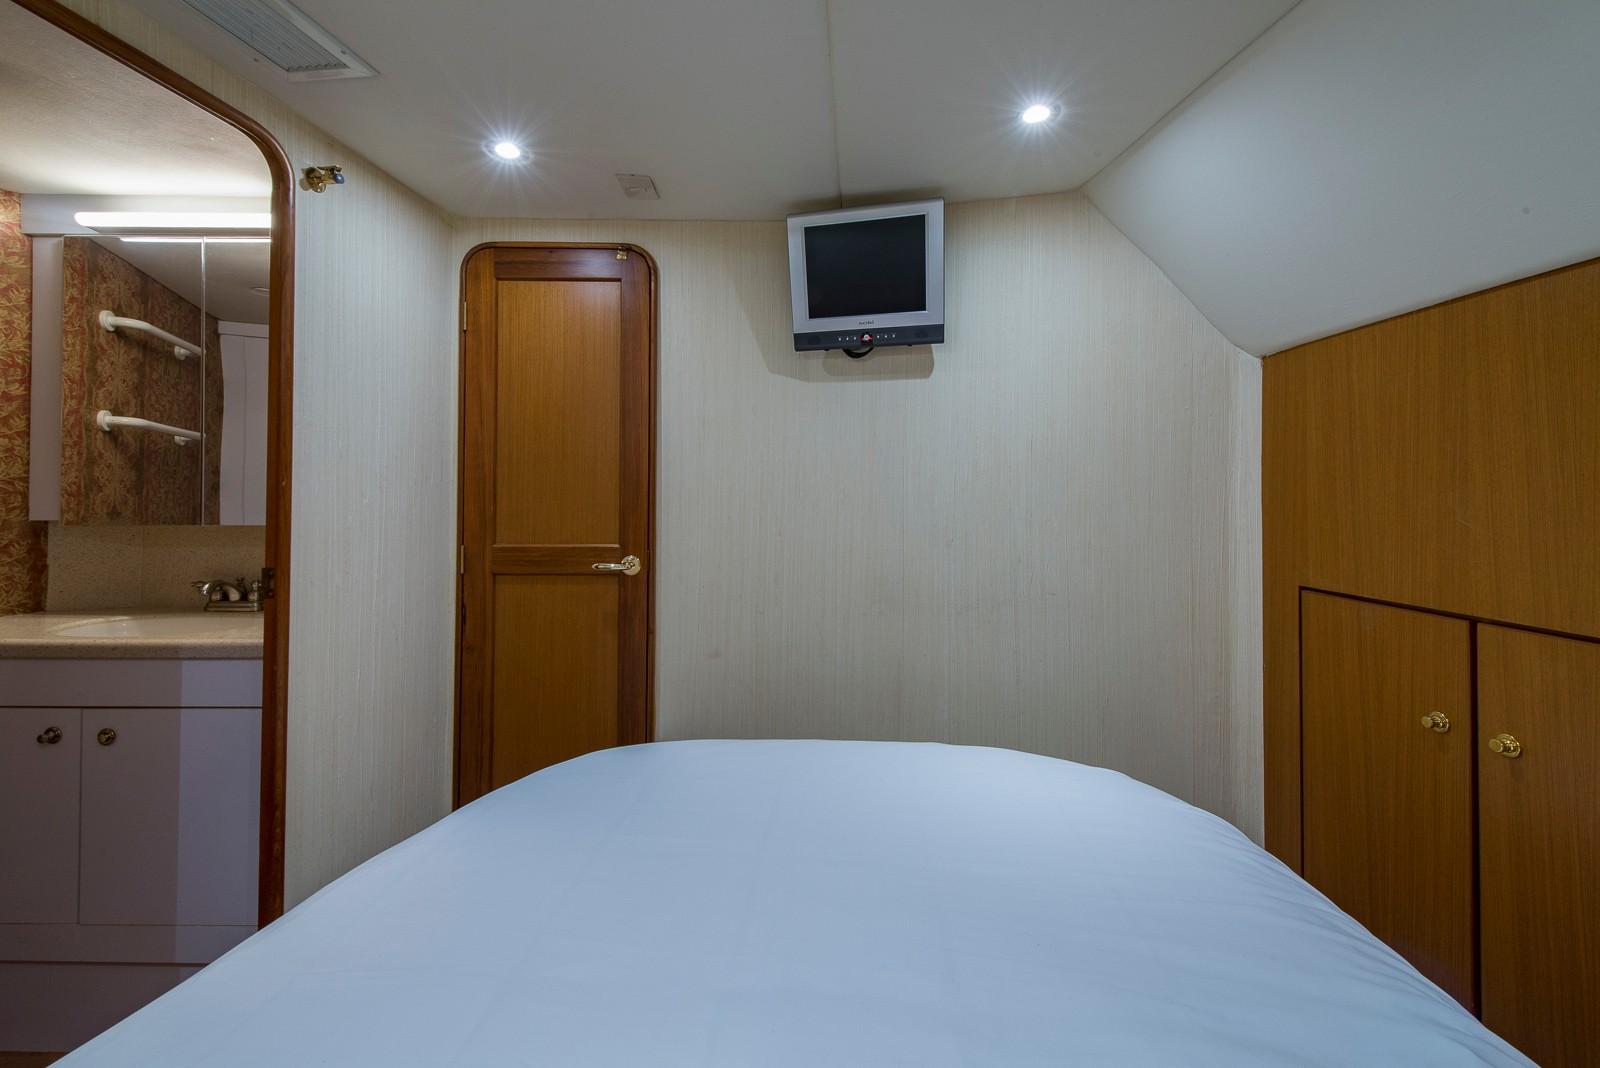 Ocean 46 Kenz Sea - Master Stateroom, Berth, TV and Entry